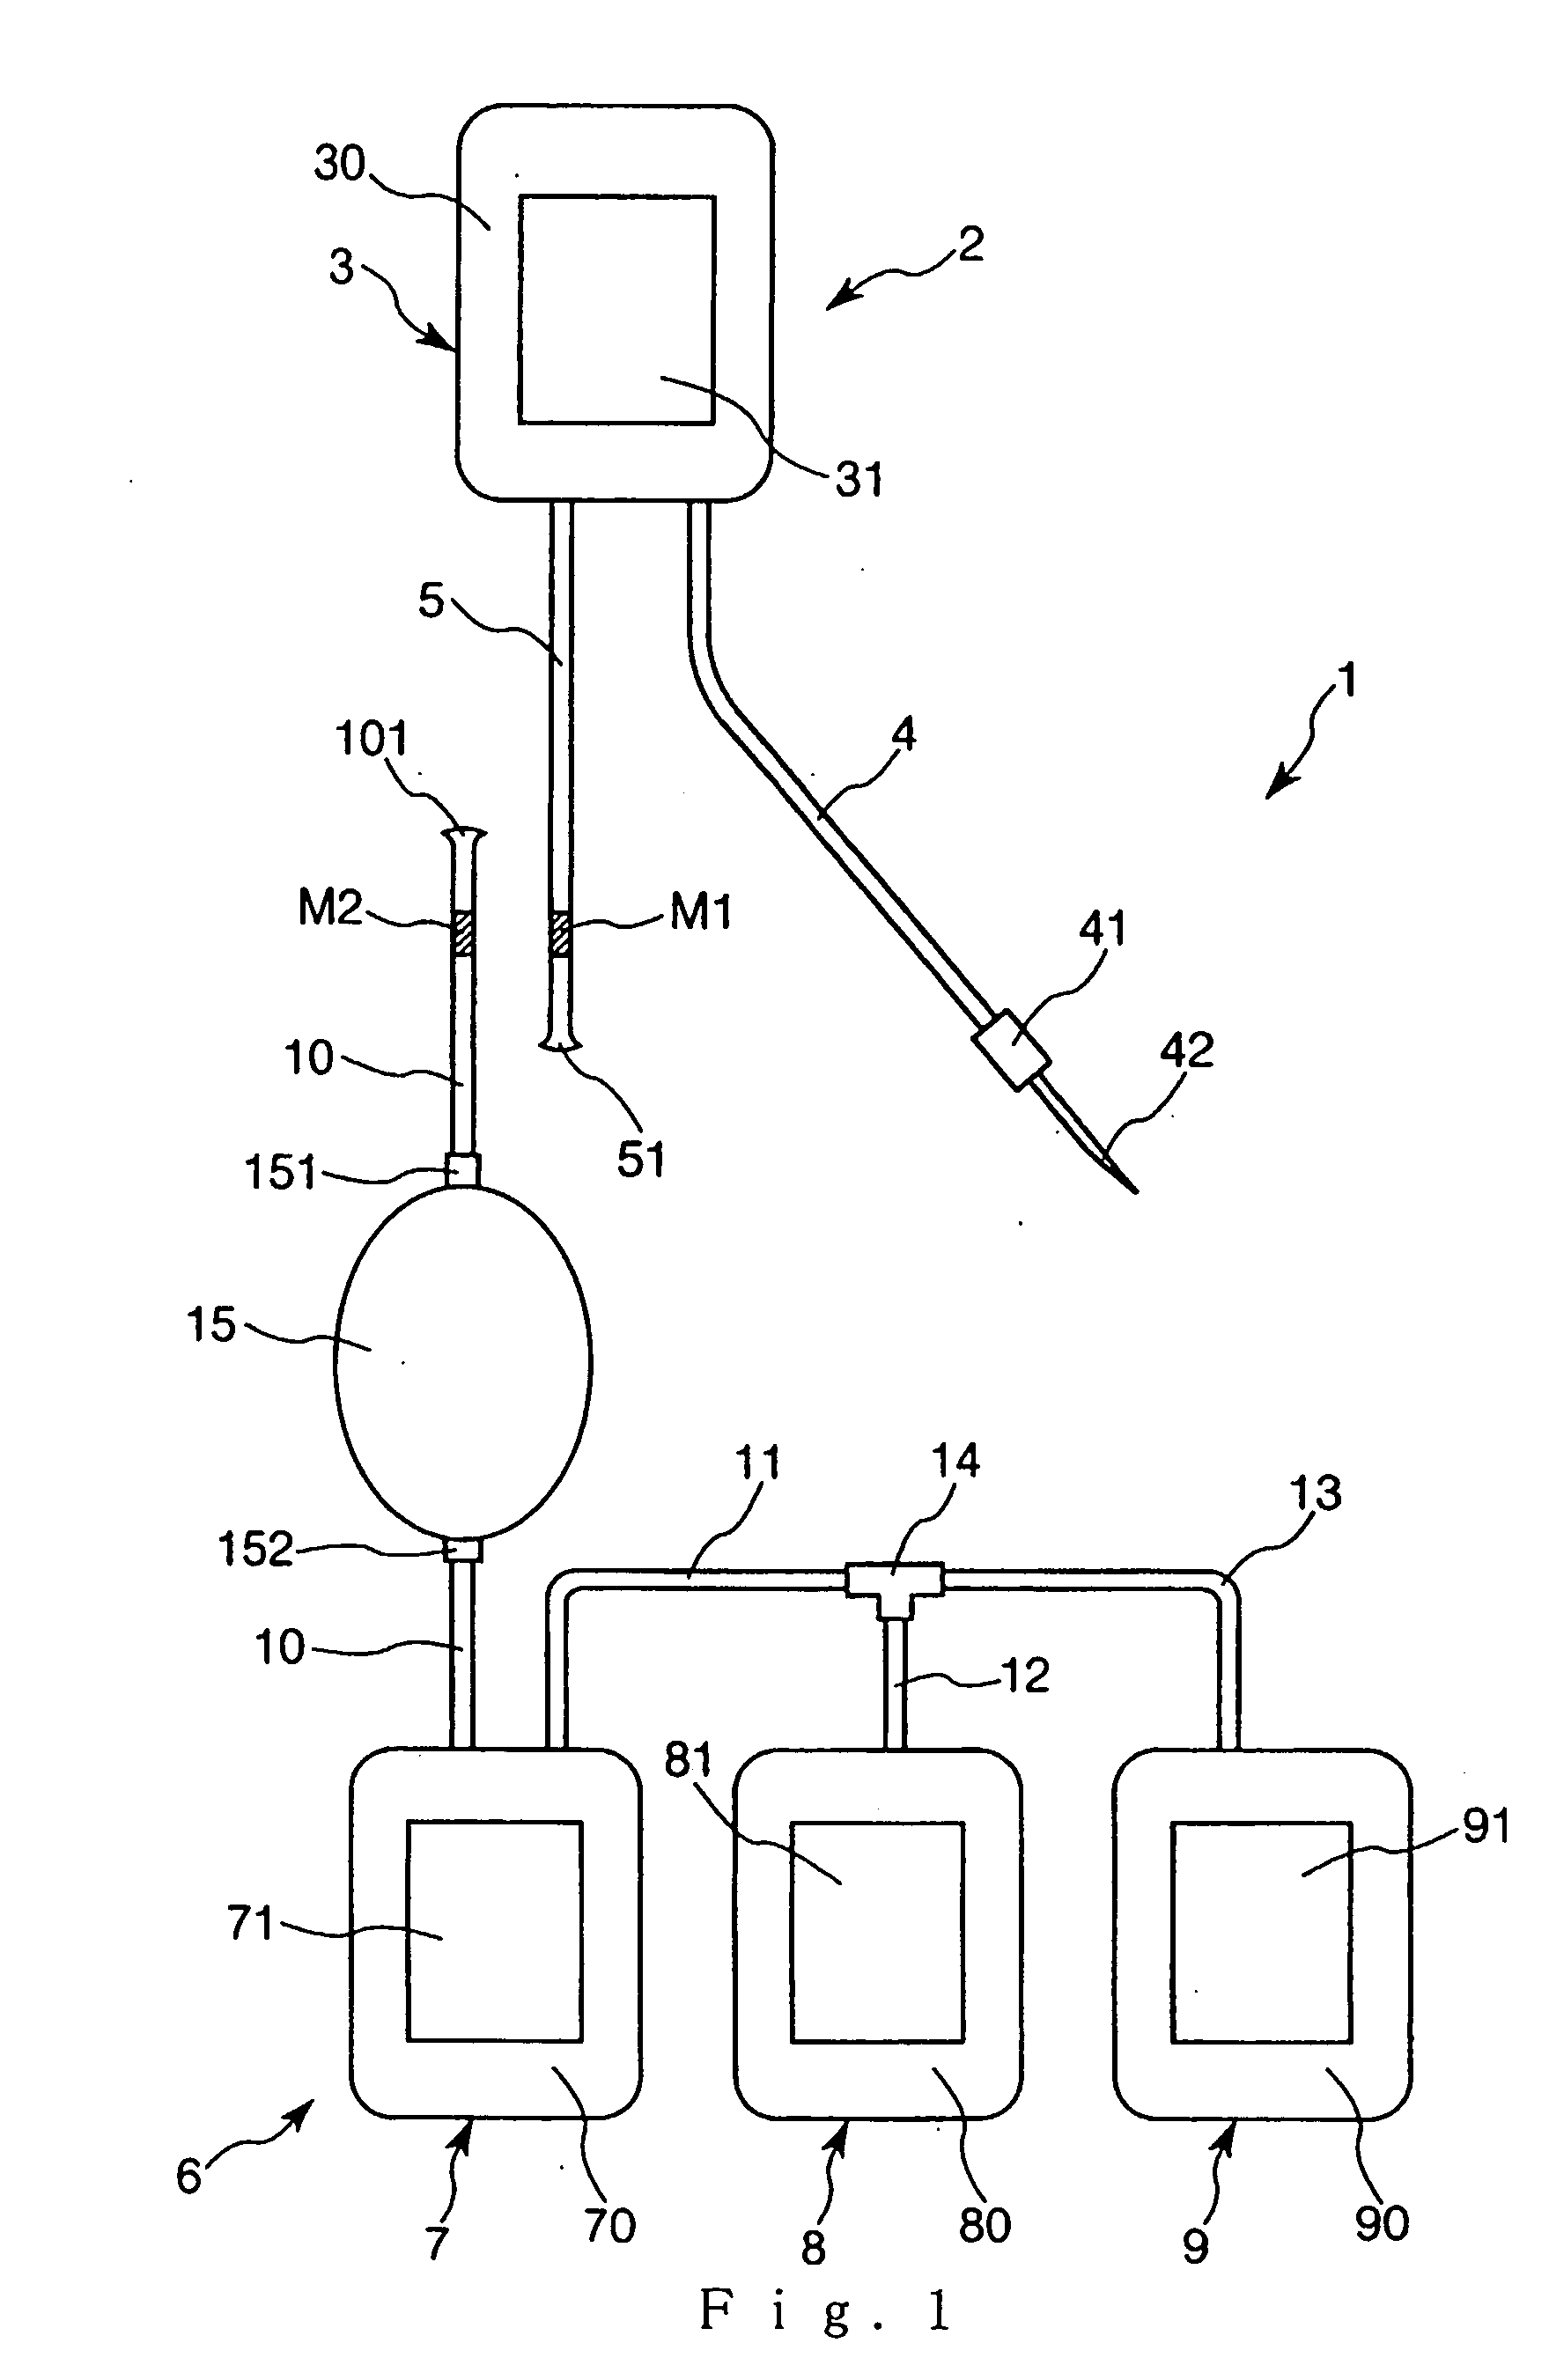 Blood treating set and cell treating set